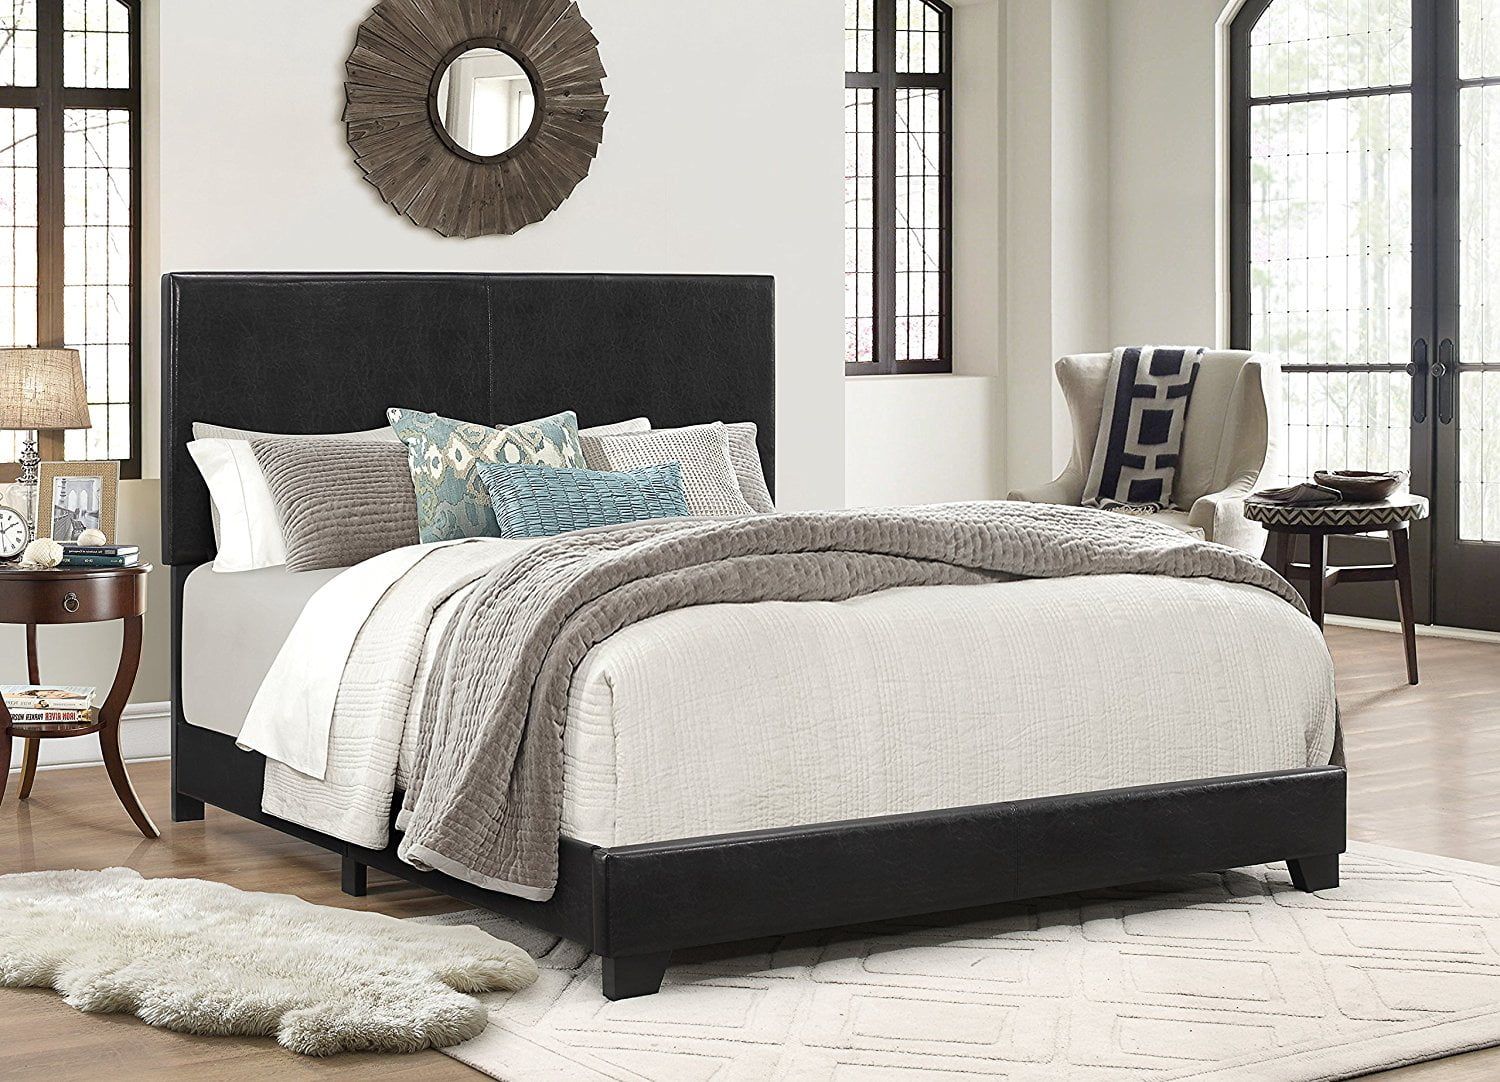 Sleek Modern Queen Platform Bed with Padded Headboard in Black Faux Leather